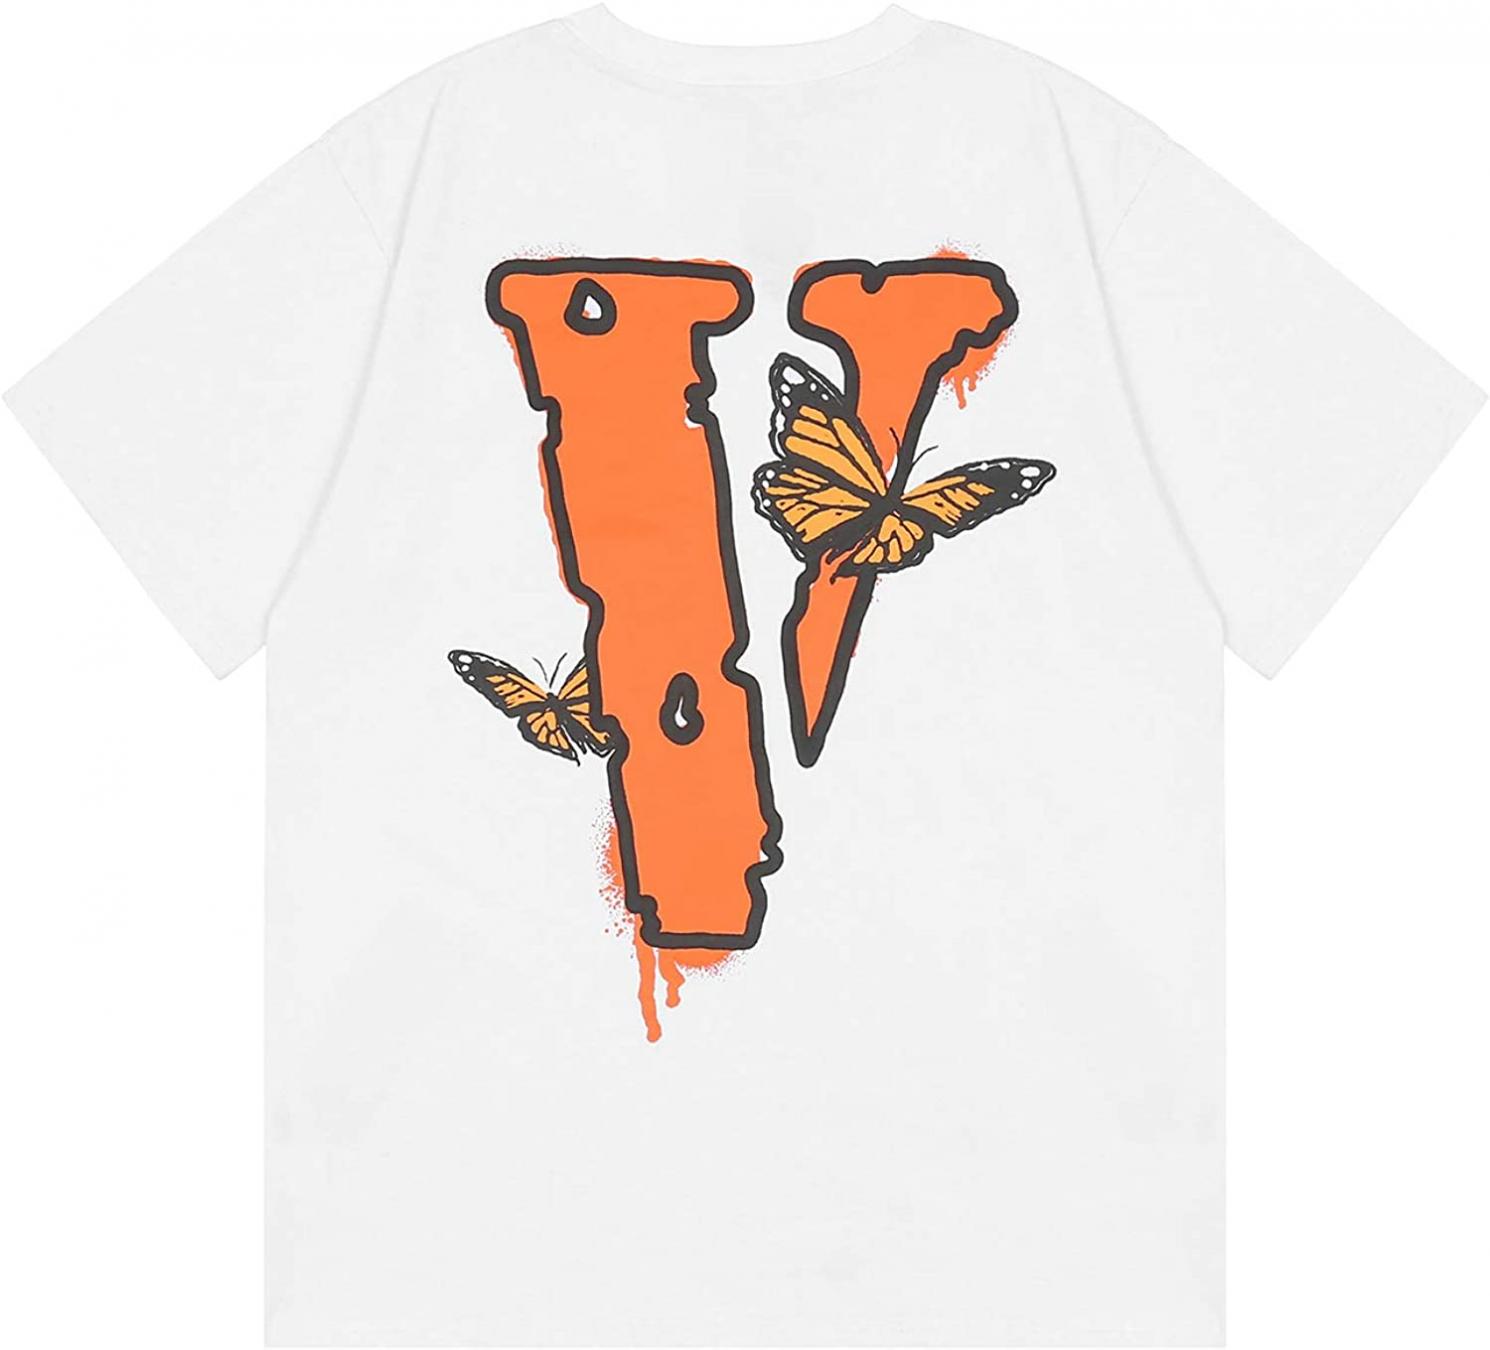 PED Big V Letter Shirts Men's Graphic Print T Shirt Hip Hop Butterfly Wings Print Short Sleeve Tee